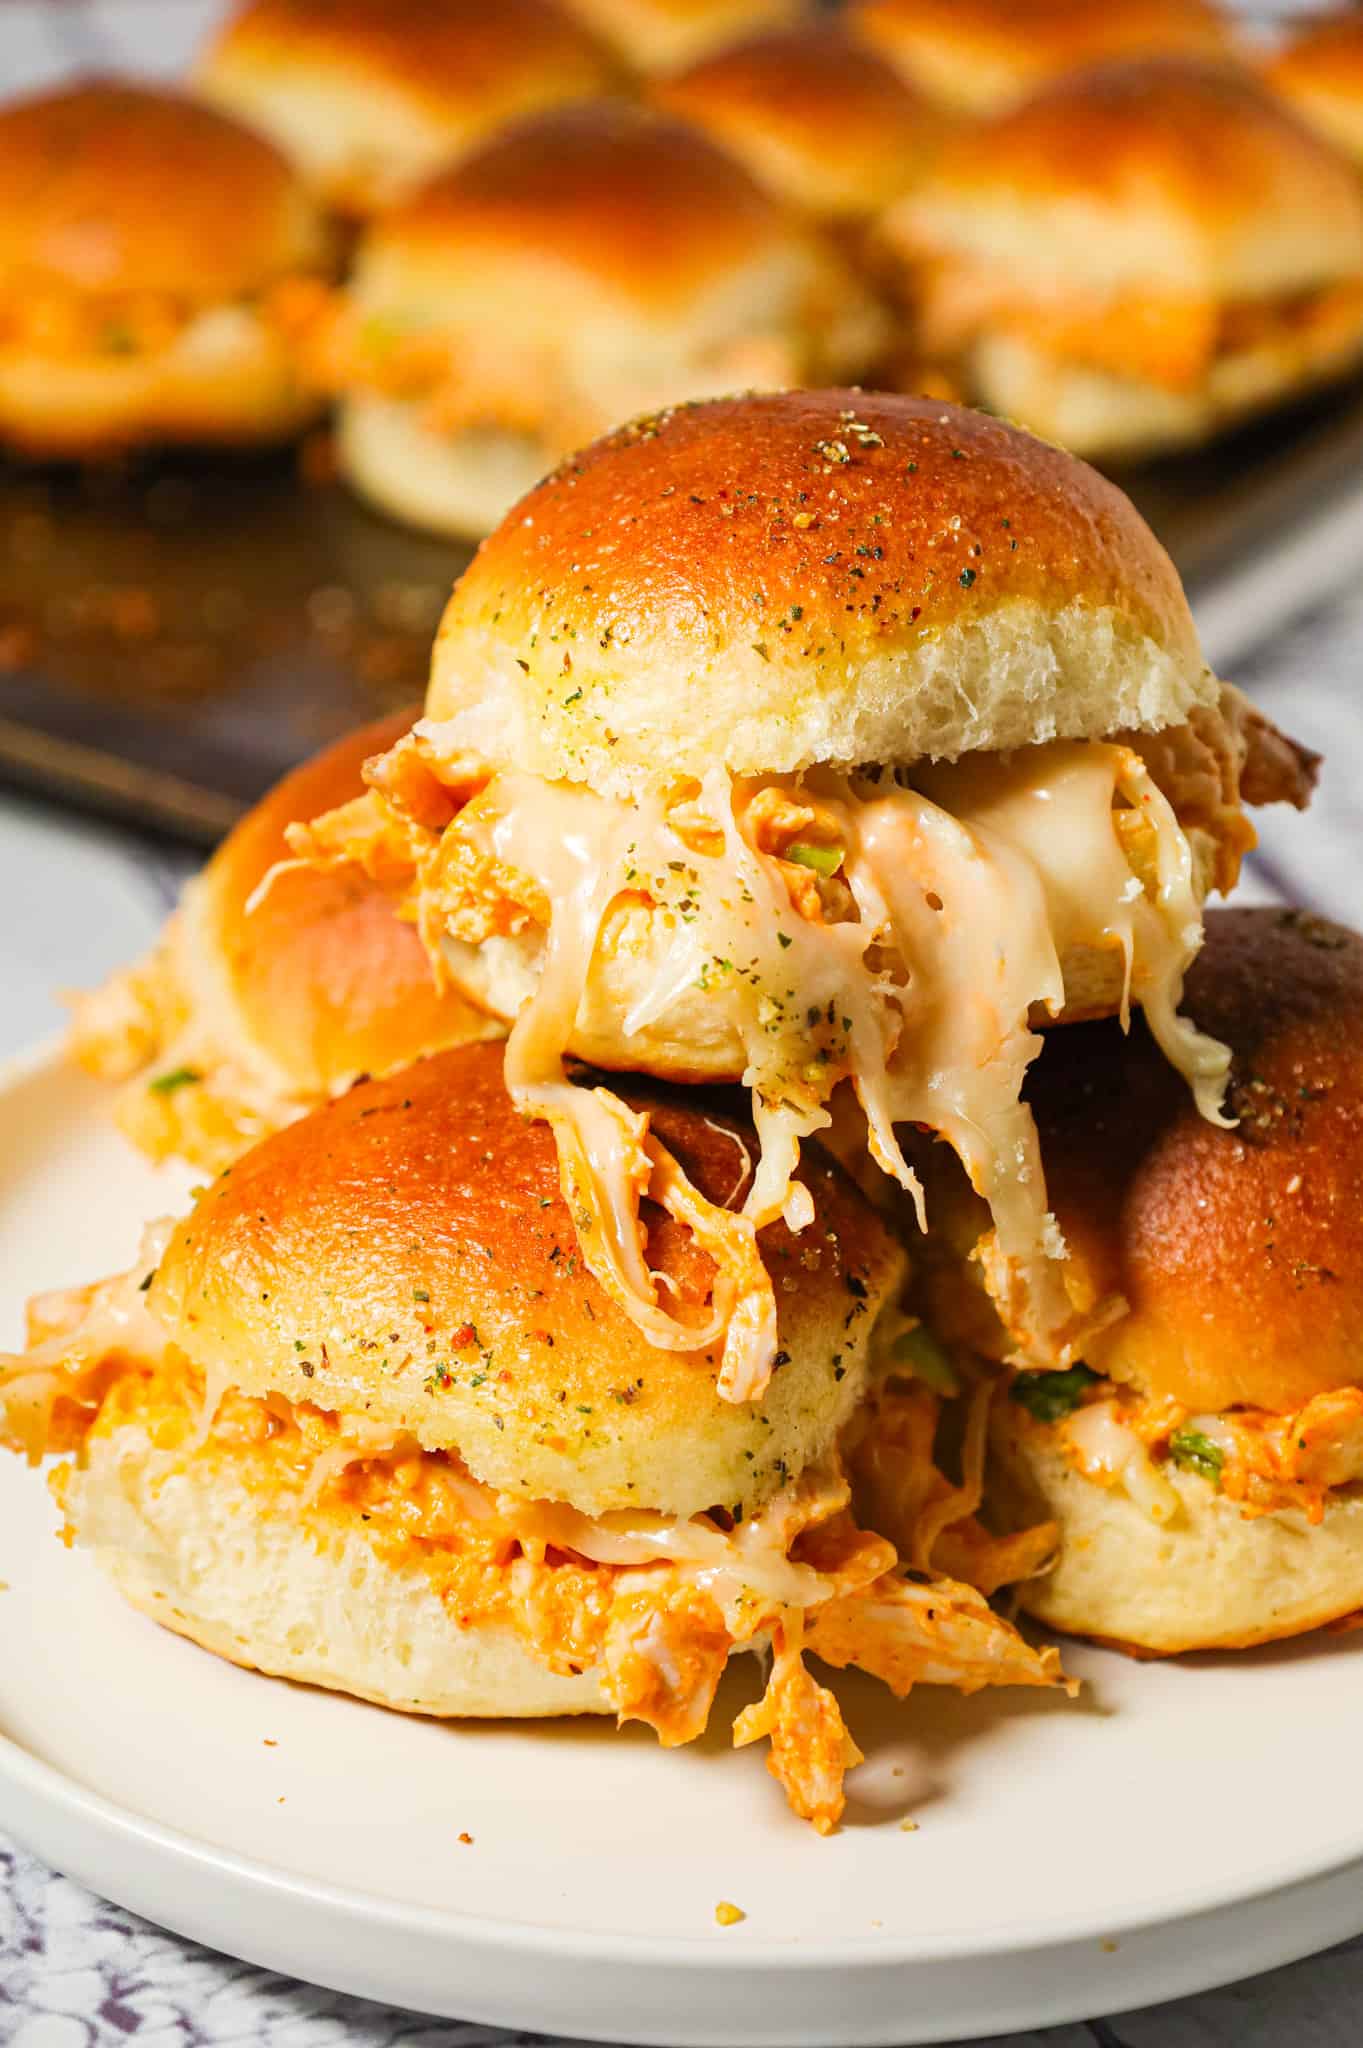 Buffalo Chicken Sliders are an easy weeknight dinner recipe using shredded rotisserie chicken, Buffalo sauce, ranch dressing, shredded cheese and chopped green onions all baked on dinner rolls.